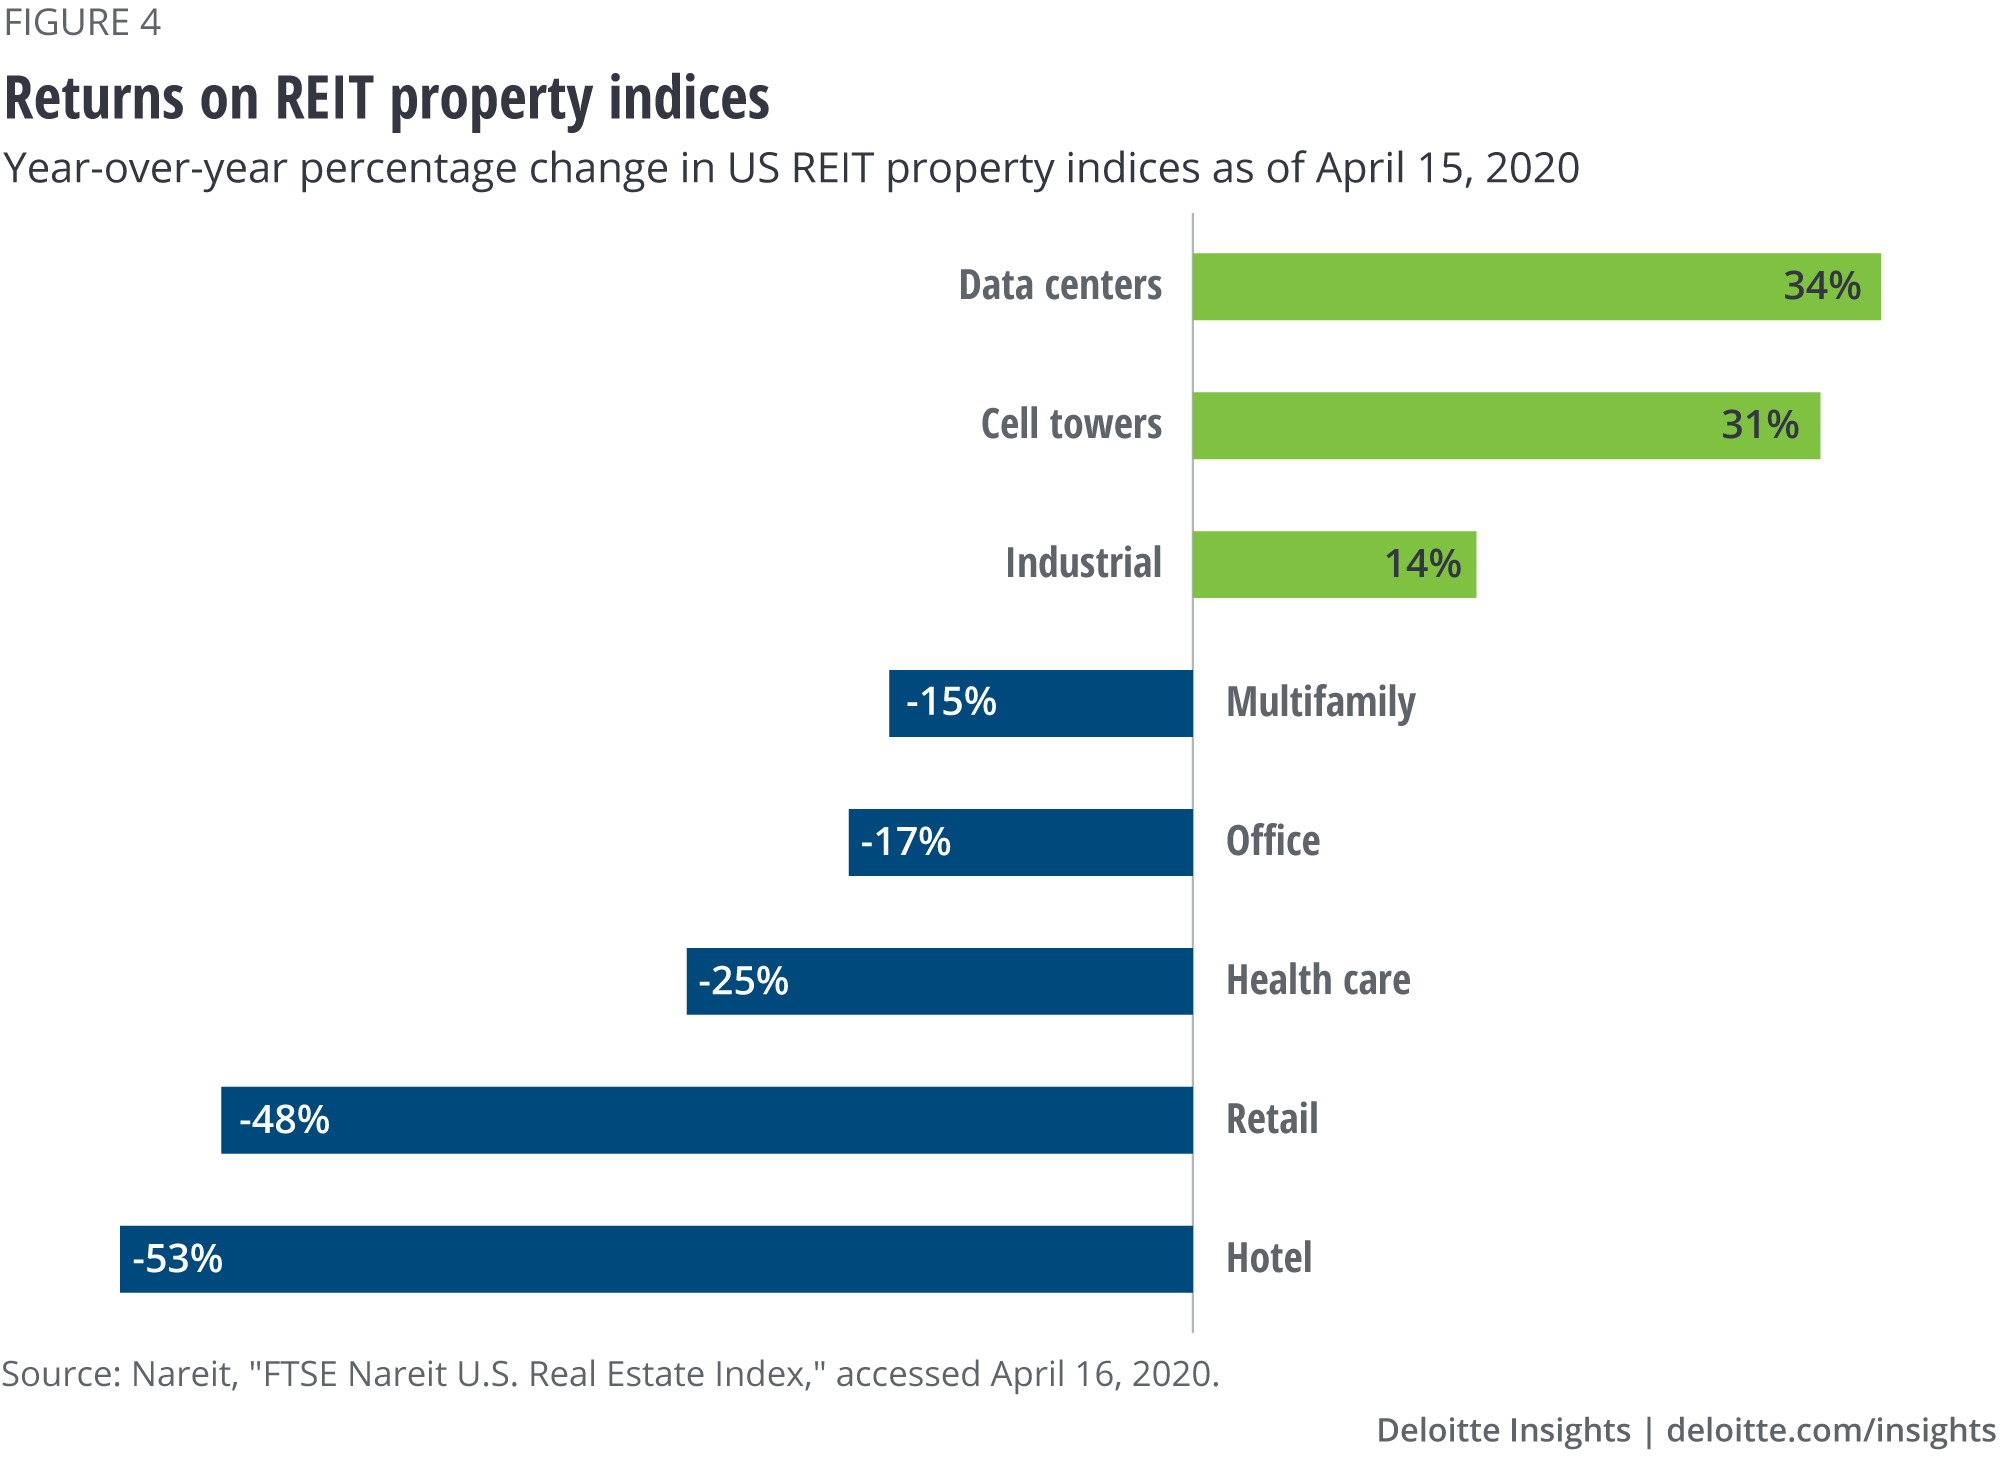 Returns on REIT property indices